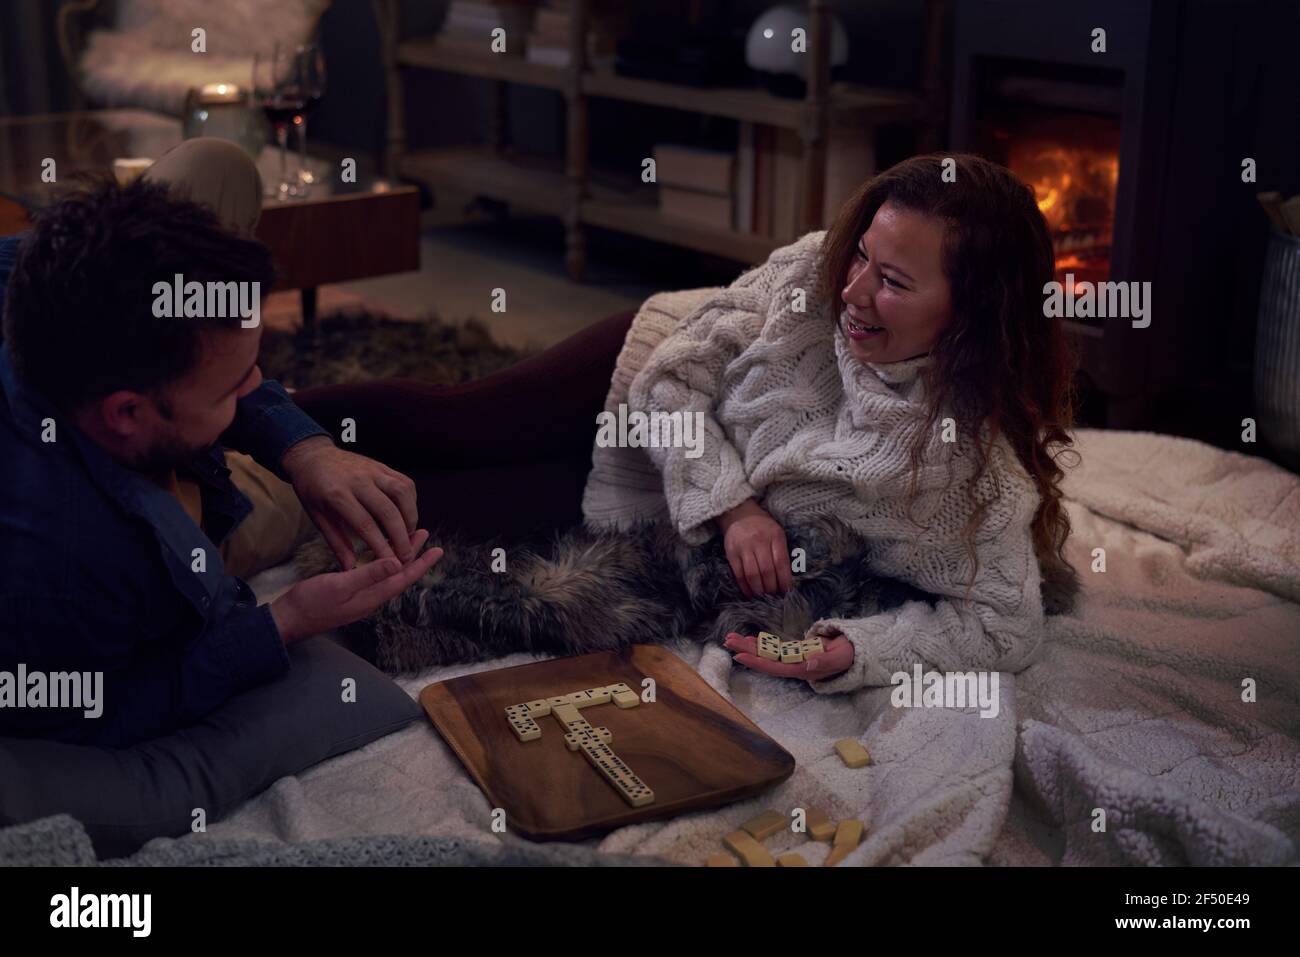 Couple playing dominoes on blanket at fireside Stock Photo